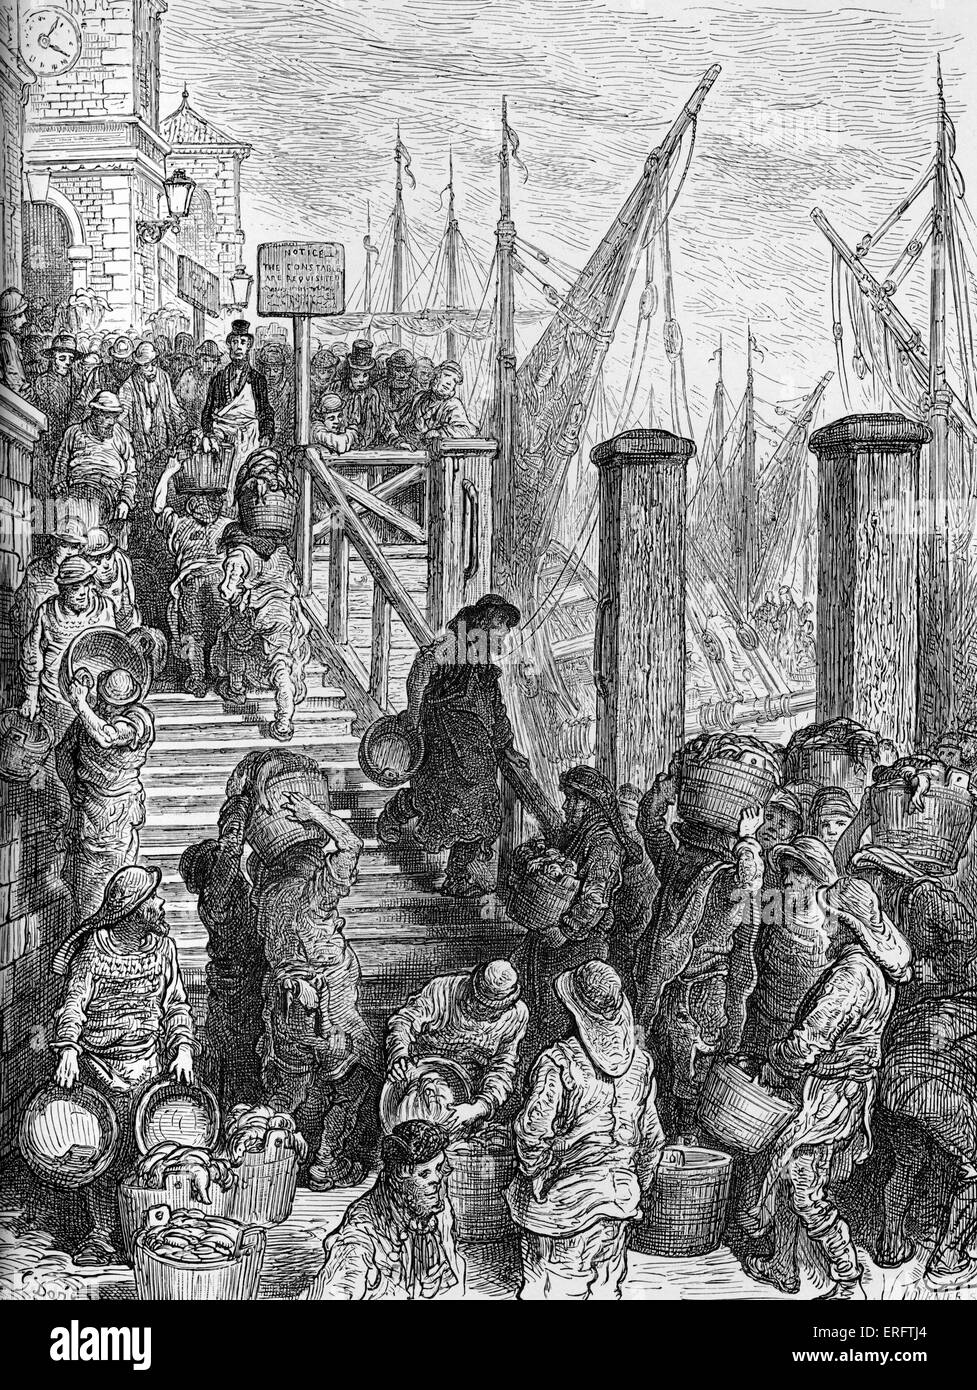 Victorian London Billingsgate, landing the fish - fishermen delivering the fish to Billingsgate. Engraving by Gustave Doré, from 'London, a Pilgrimage, by Gustave Doré and Blanchard Jerrold', 1872. Stock Photo